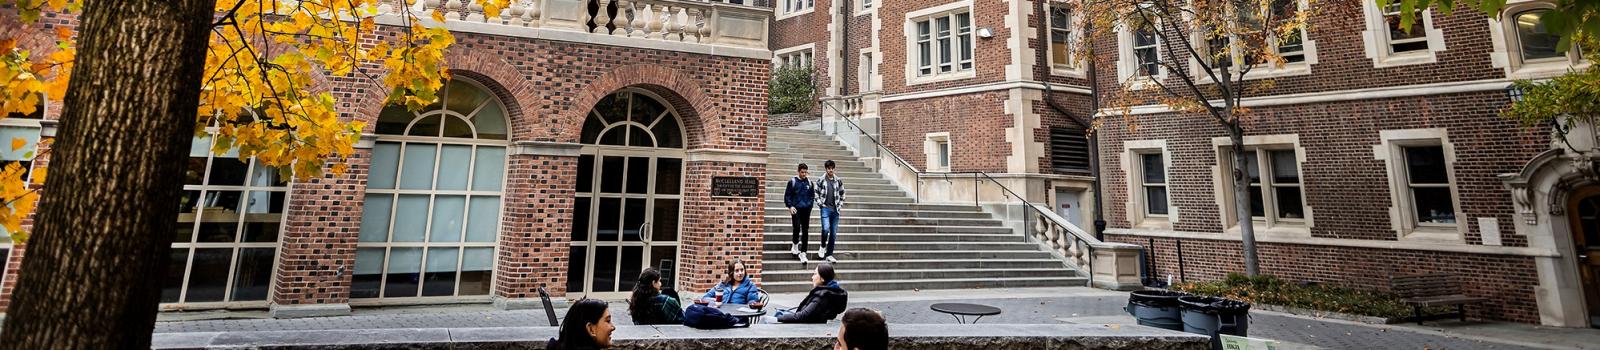 Students in Penn's Quad